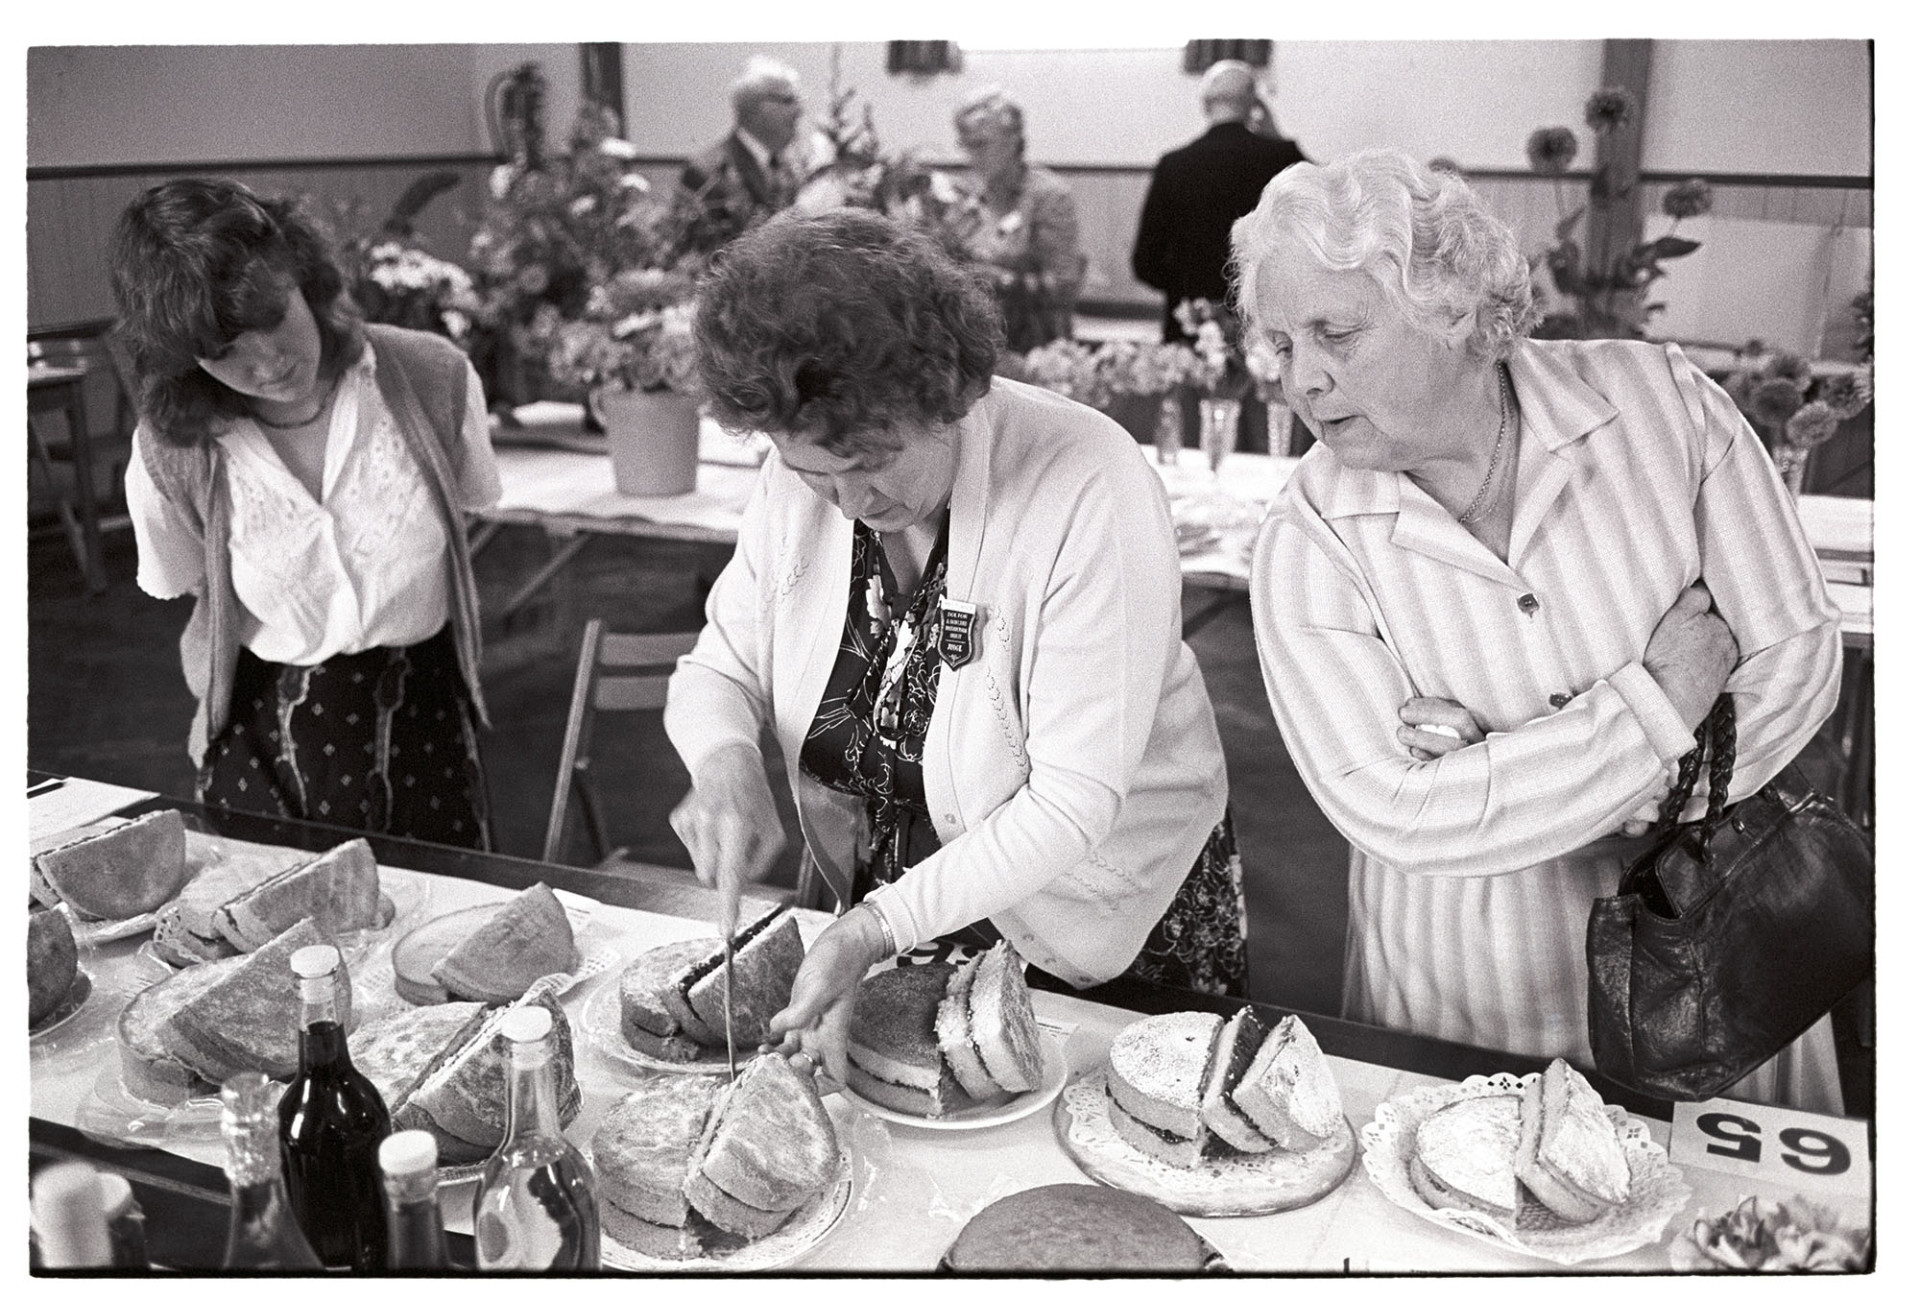 Woman judging cakes at Dolton Flower Show by James Ravilious